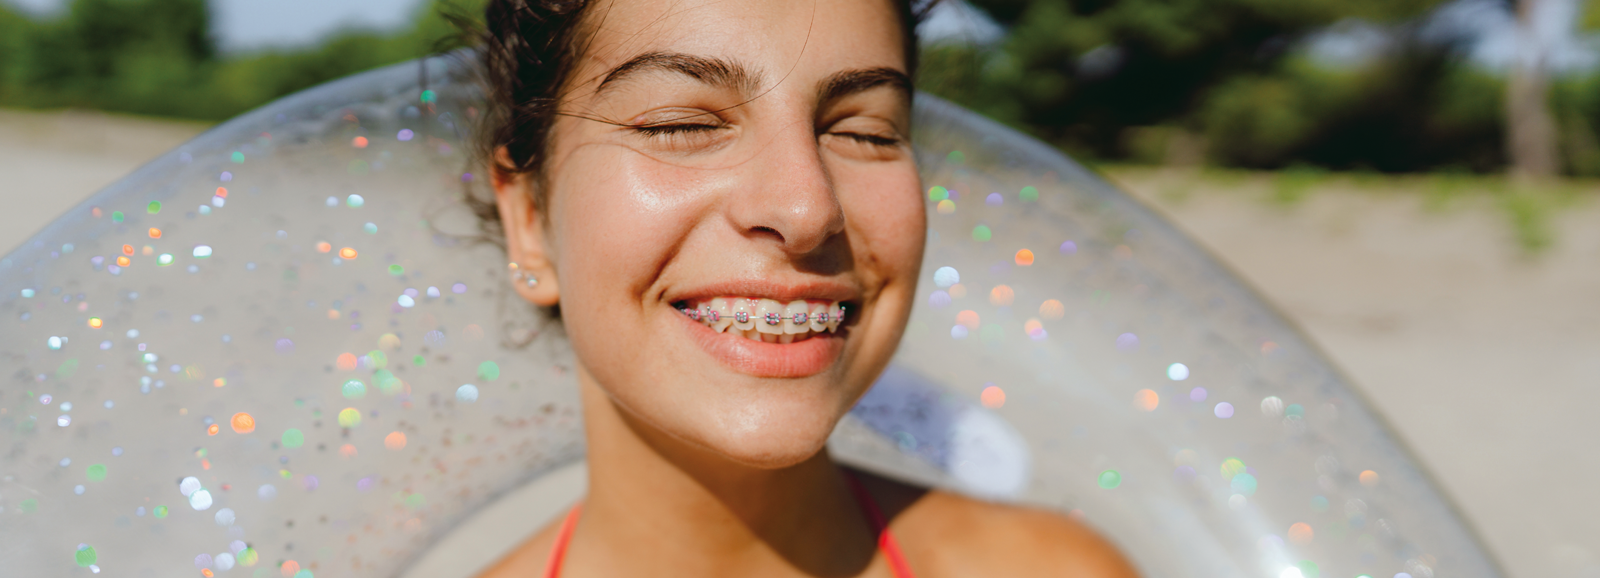 girl-with-braces-smiling-1600x578.png